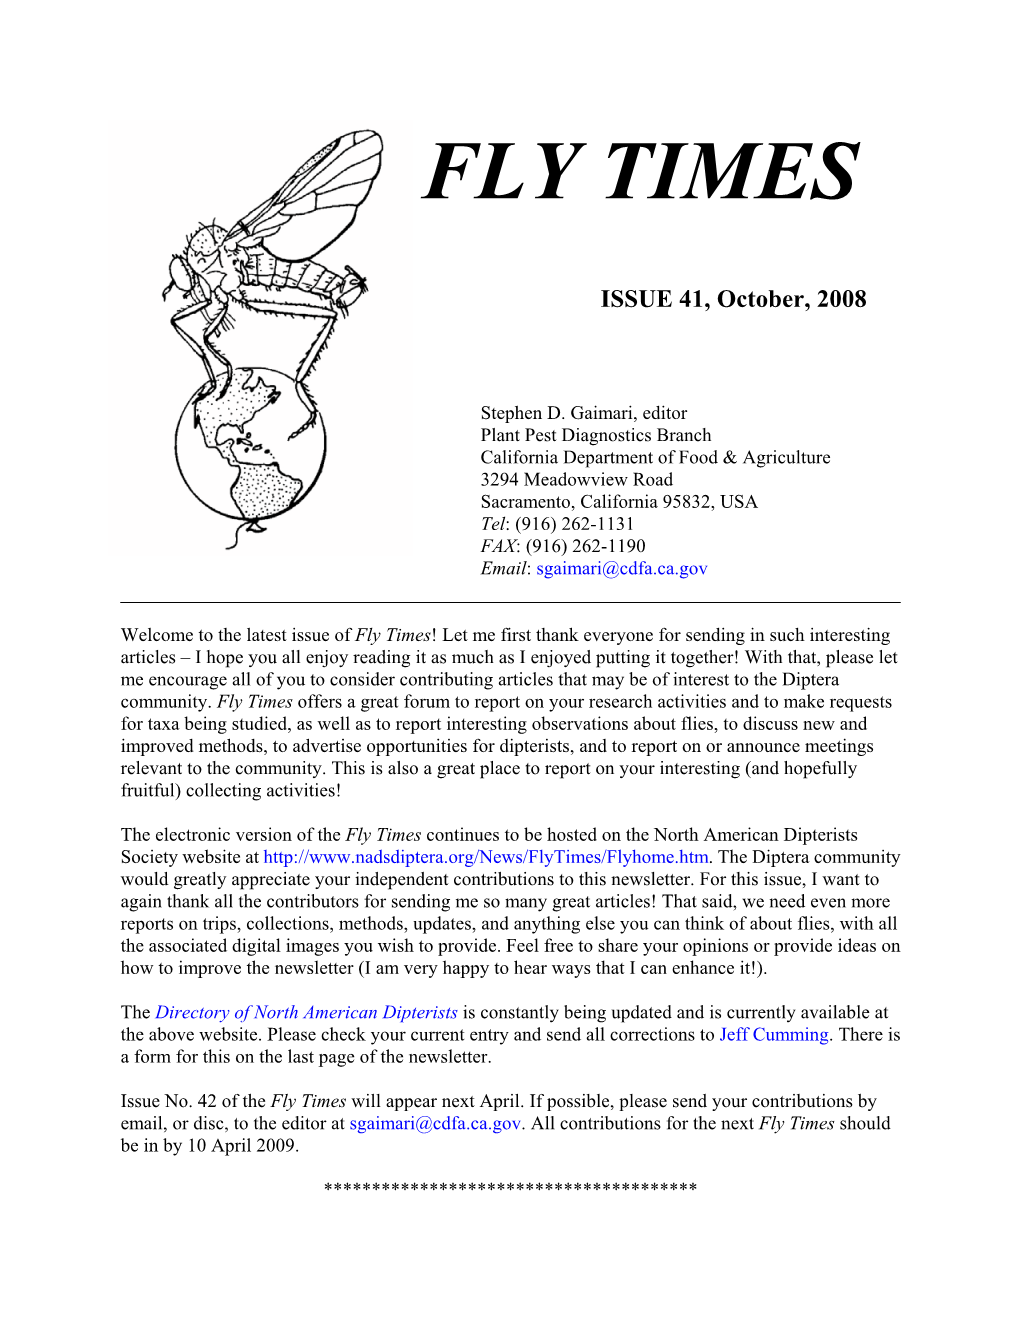 Fly Times Issue 41, October 2008